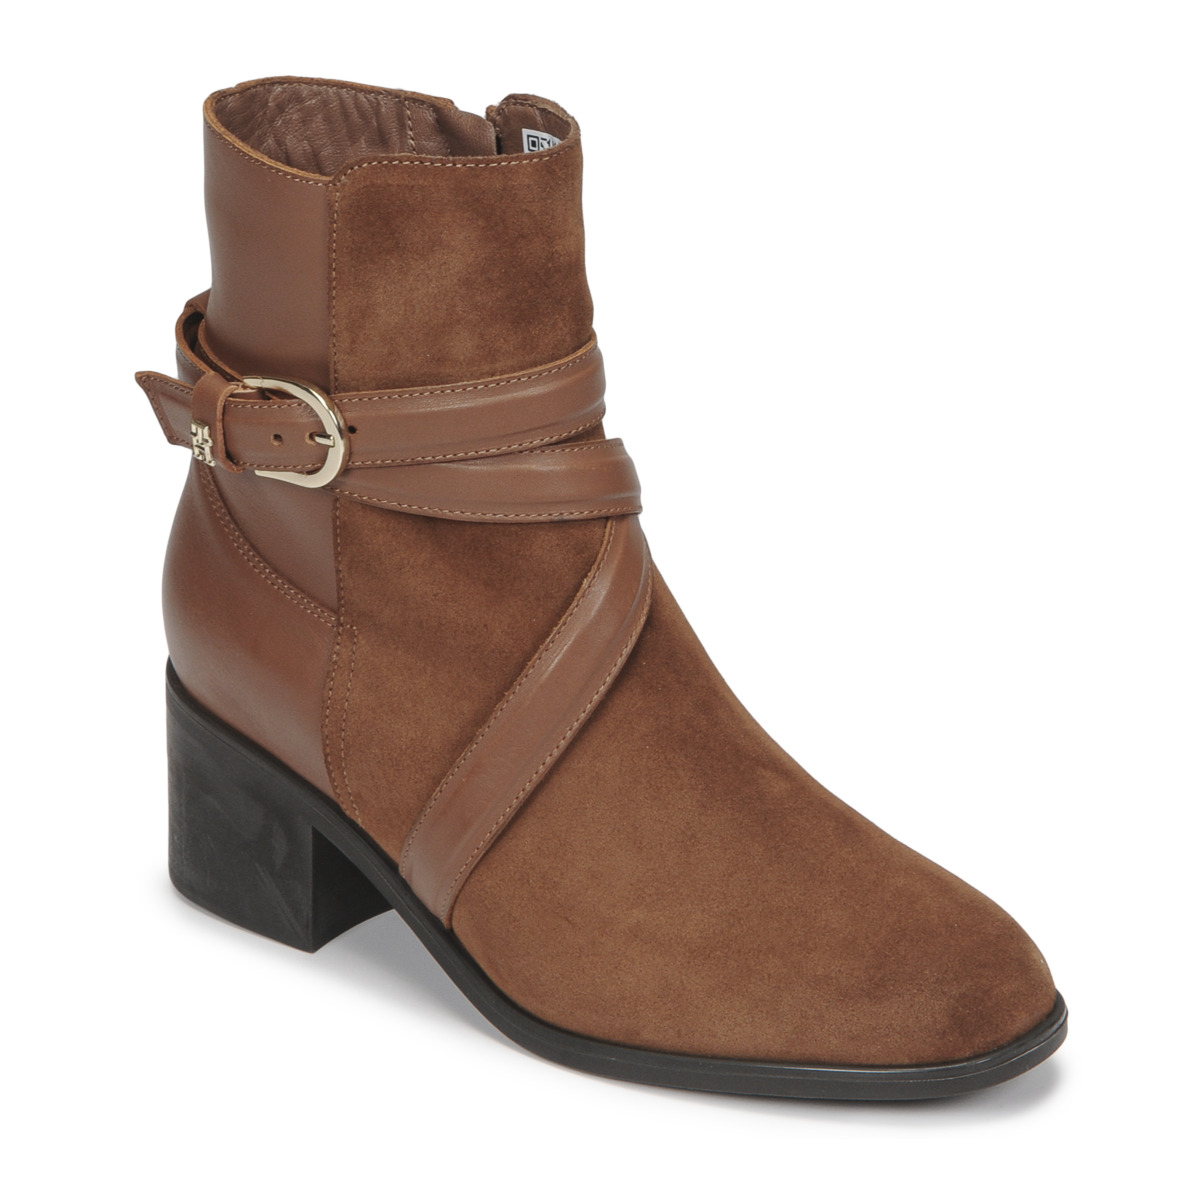 Sapatos Mulher Cap TOMMY HILFIGER Th Lux Cashmere Beanie AM0AM07873 DW5 ELEVATED ESSENTIAL MIDHEEL BOOT Camel